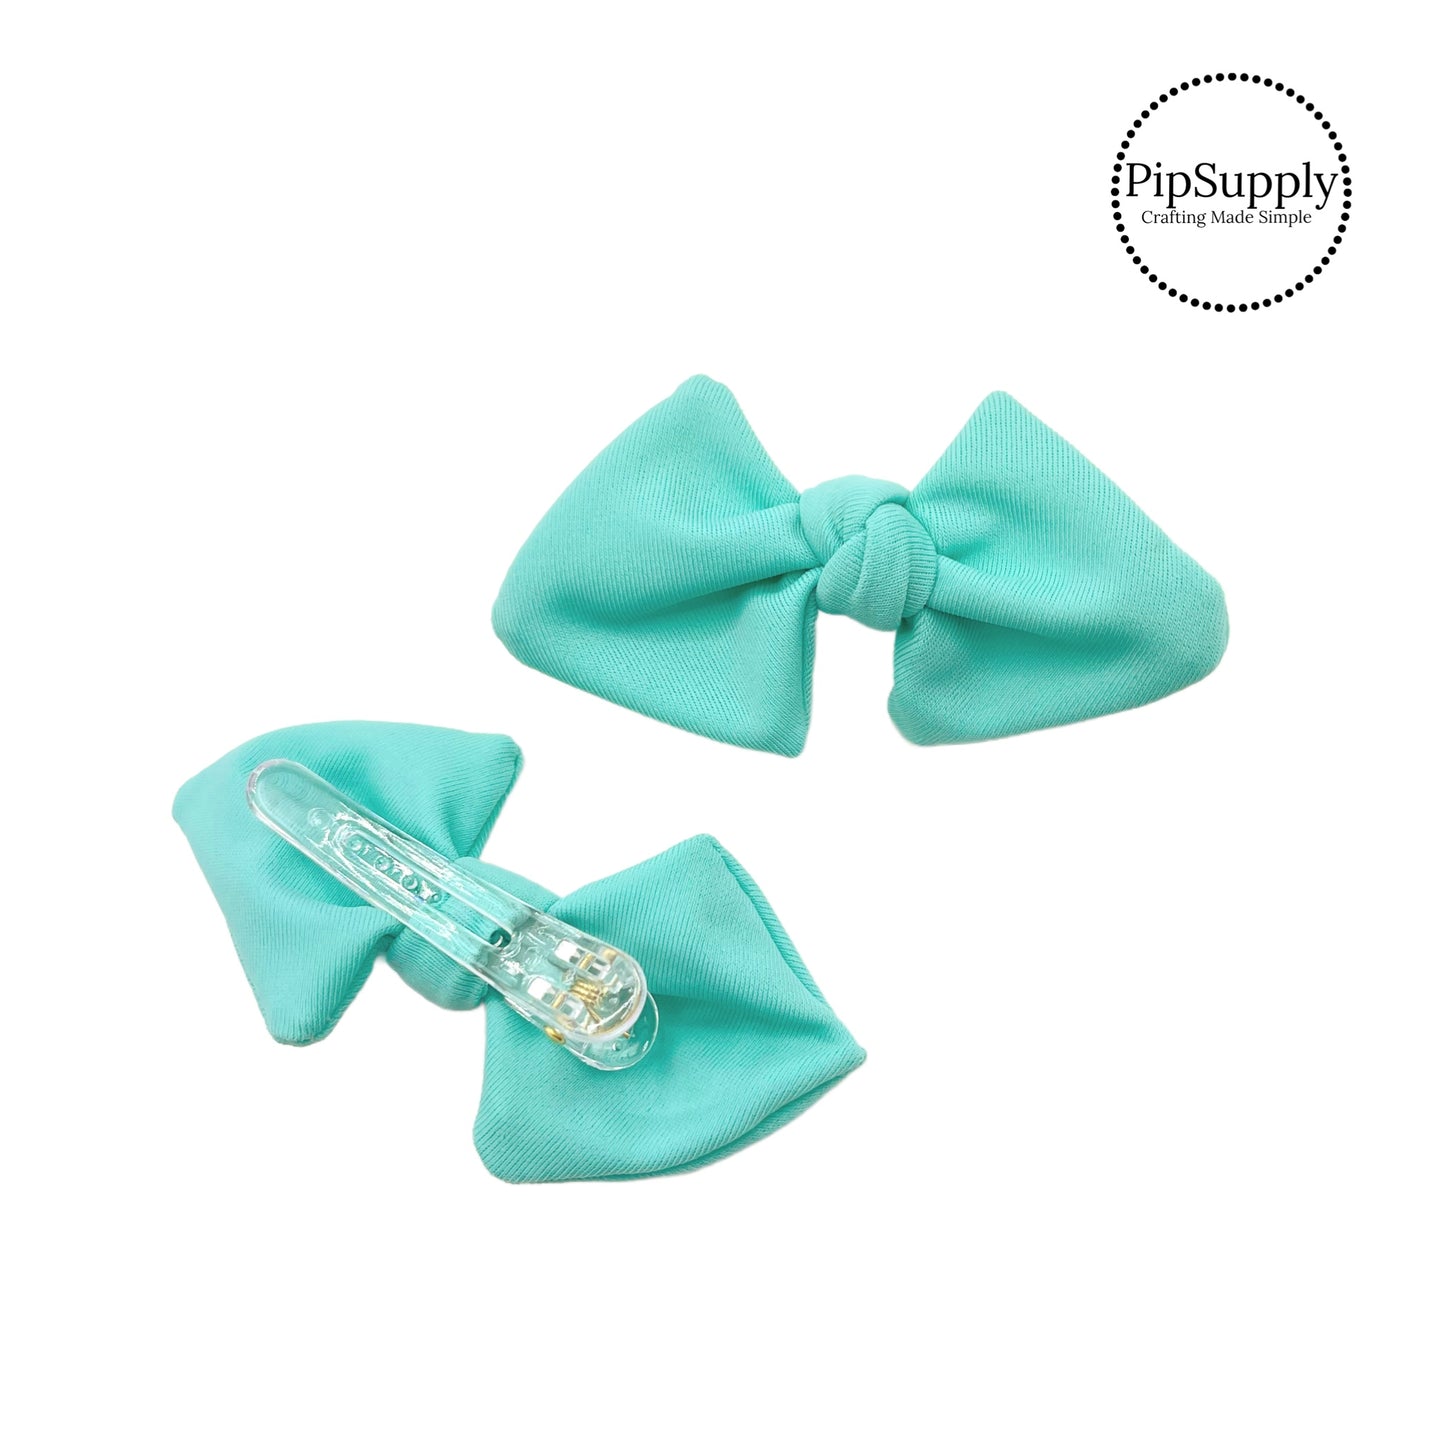 These aqua swim bows have a two layer swimsuit fabric bow with edges that are securely folded and sewn providing a professional and high quality seam. Fabric is thick high quality not coarse or stiff and the pattern is visible on all sides. Bow comes pre-tied on a clear plastic clip.